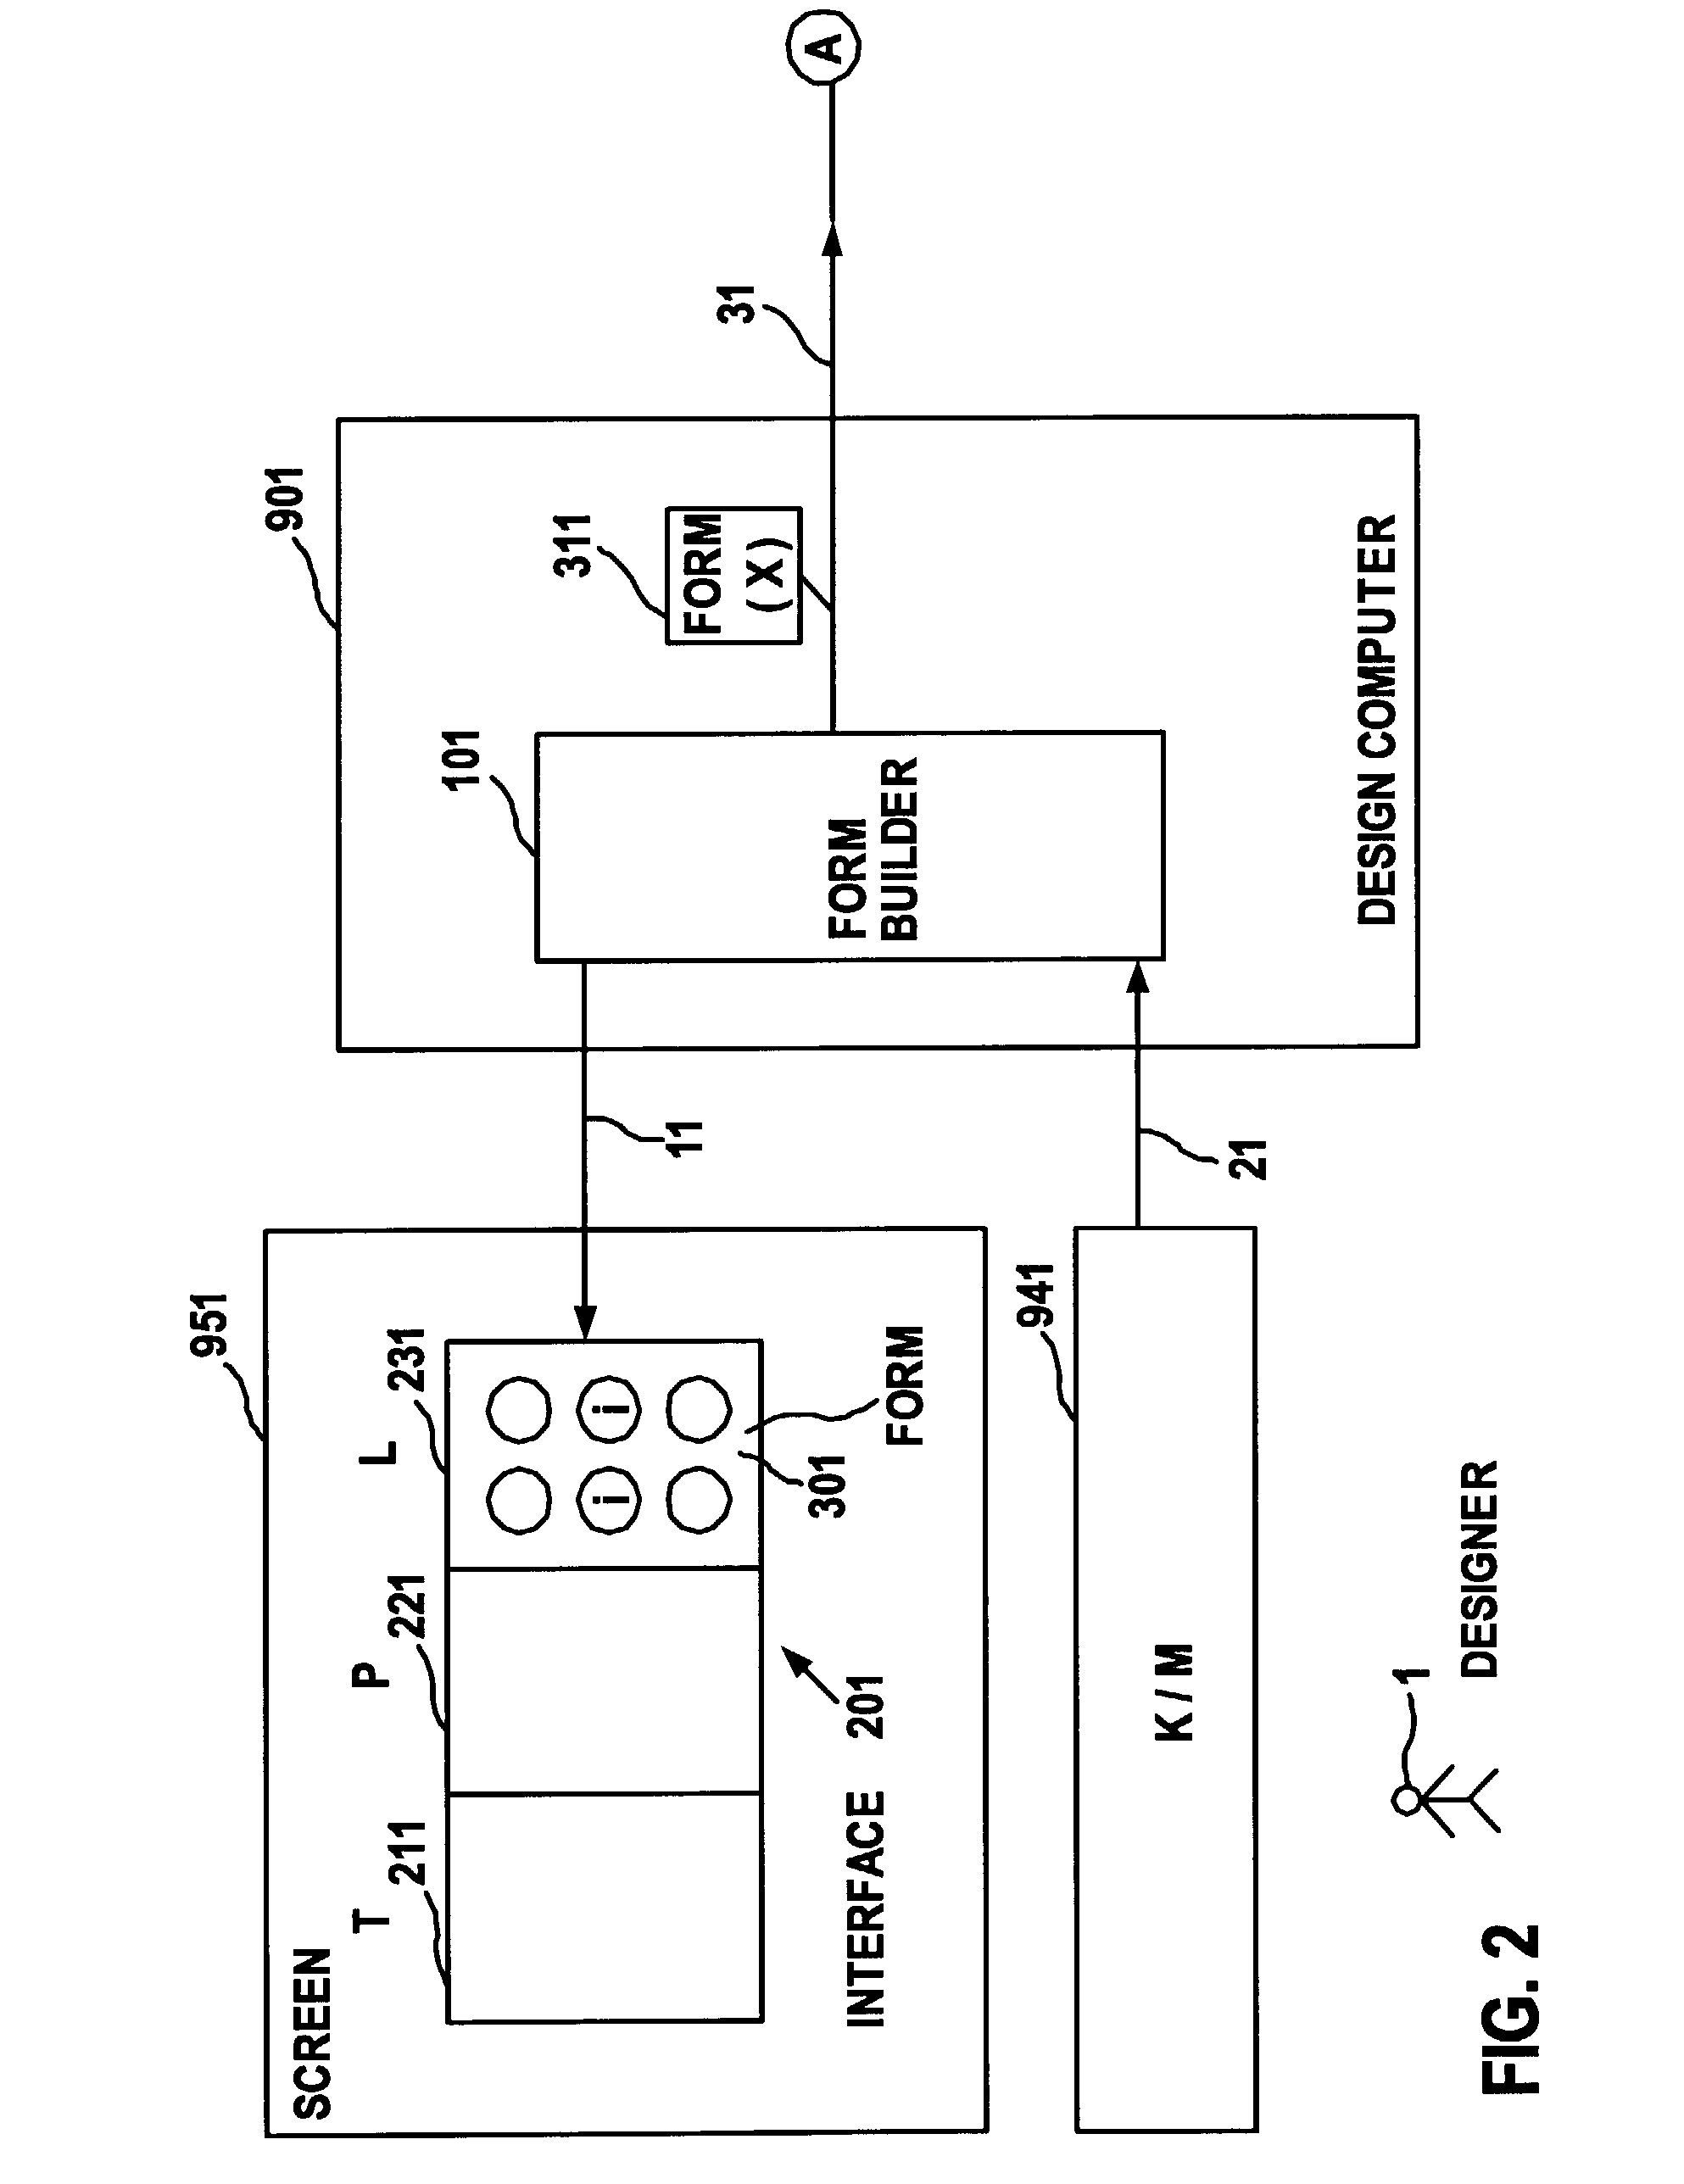 Methods and systems for providing a document with interactive elements to retrieve information for processing by business applications